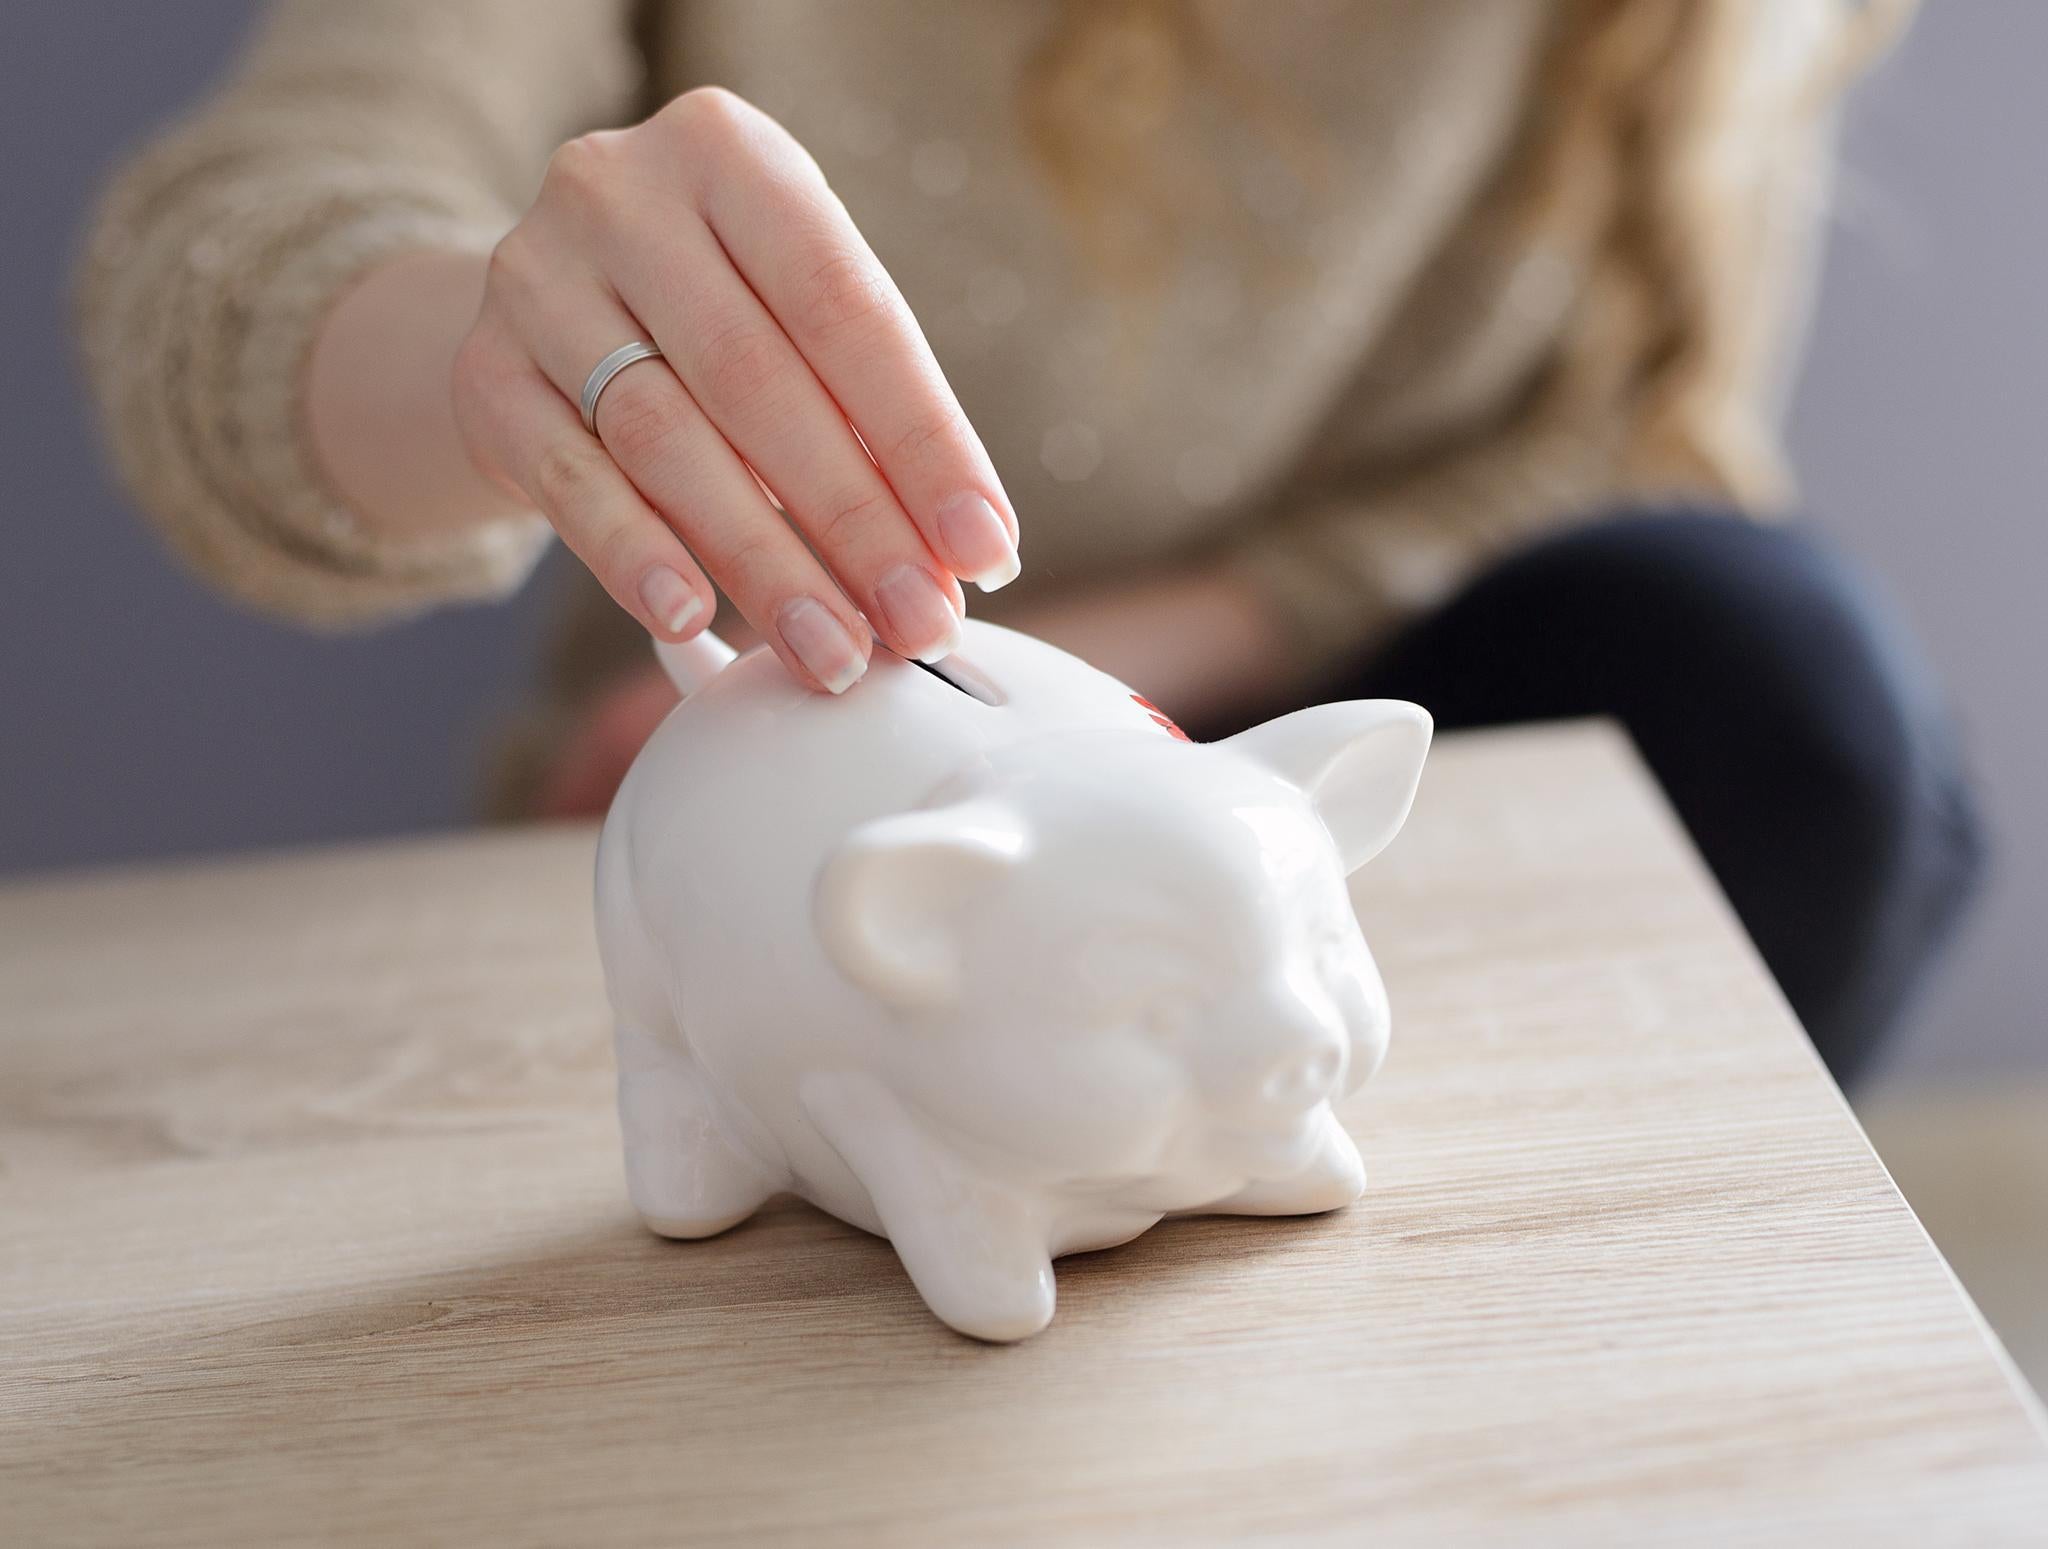 It’s little surprise that 17 million Brits have £100 or less in emergency savings